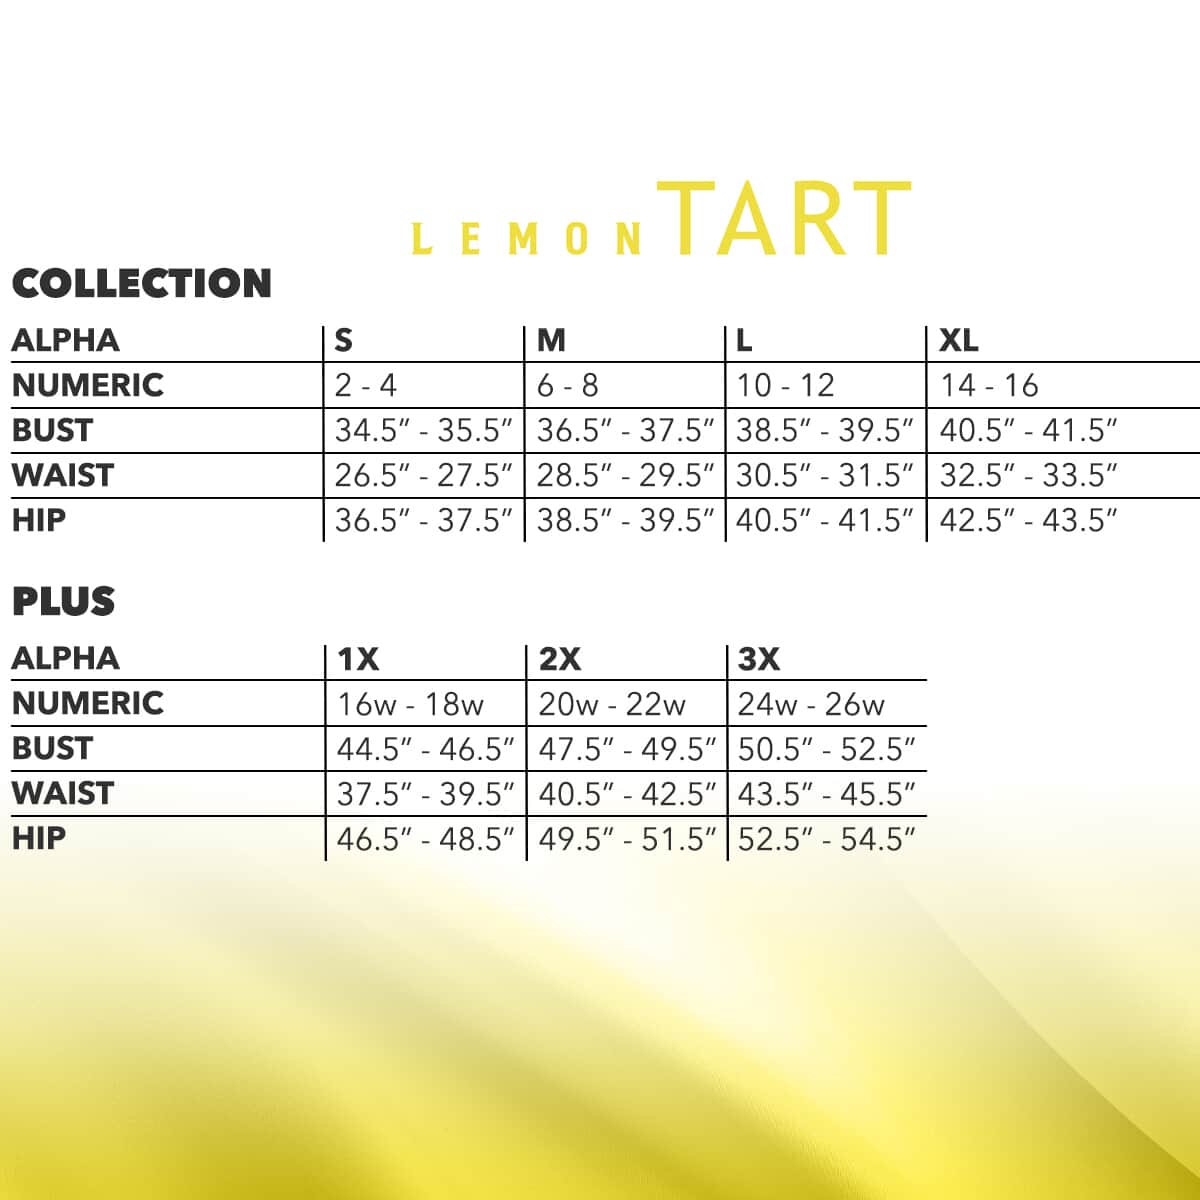 LEMON TART Black and White Speckle Microfiber Blanche Pant with Drawstring - M image number 4